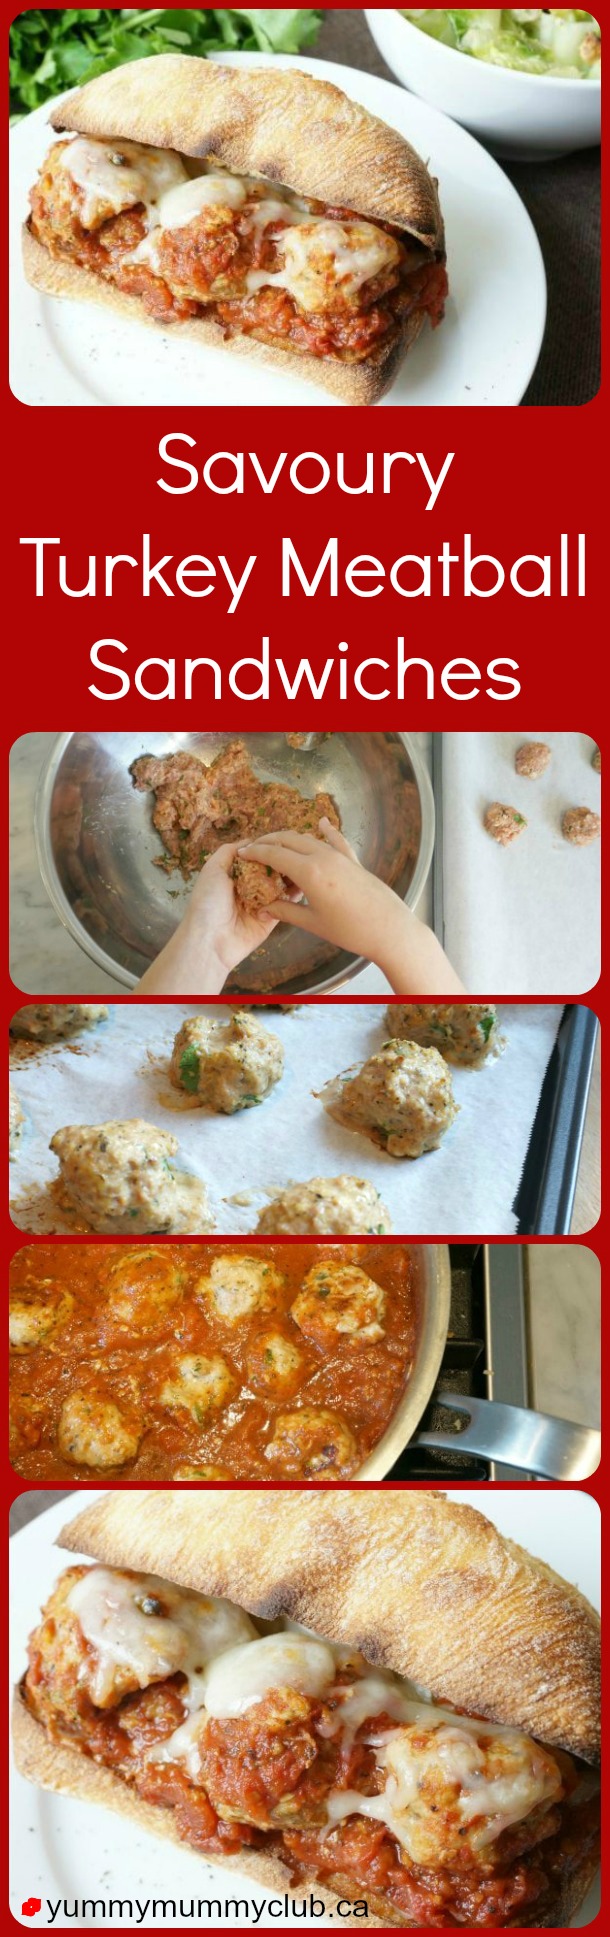 Turkey meatball subs are a great family-friendly dish, because they are versatile, they are easy to make, and the kids can help make them. The ingredients are simple, and the meatballs can be made in advance, frozen, and then popped in the delicious marinara sauce to warm them through. Add a crusty bun, some melty cheese and you have a quick weeknight dinner, or a busy hockey weekend meal. | YMCFood | YummyMummyClub.ca